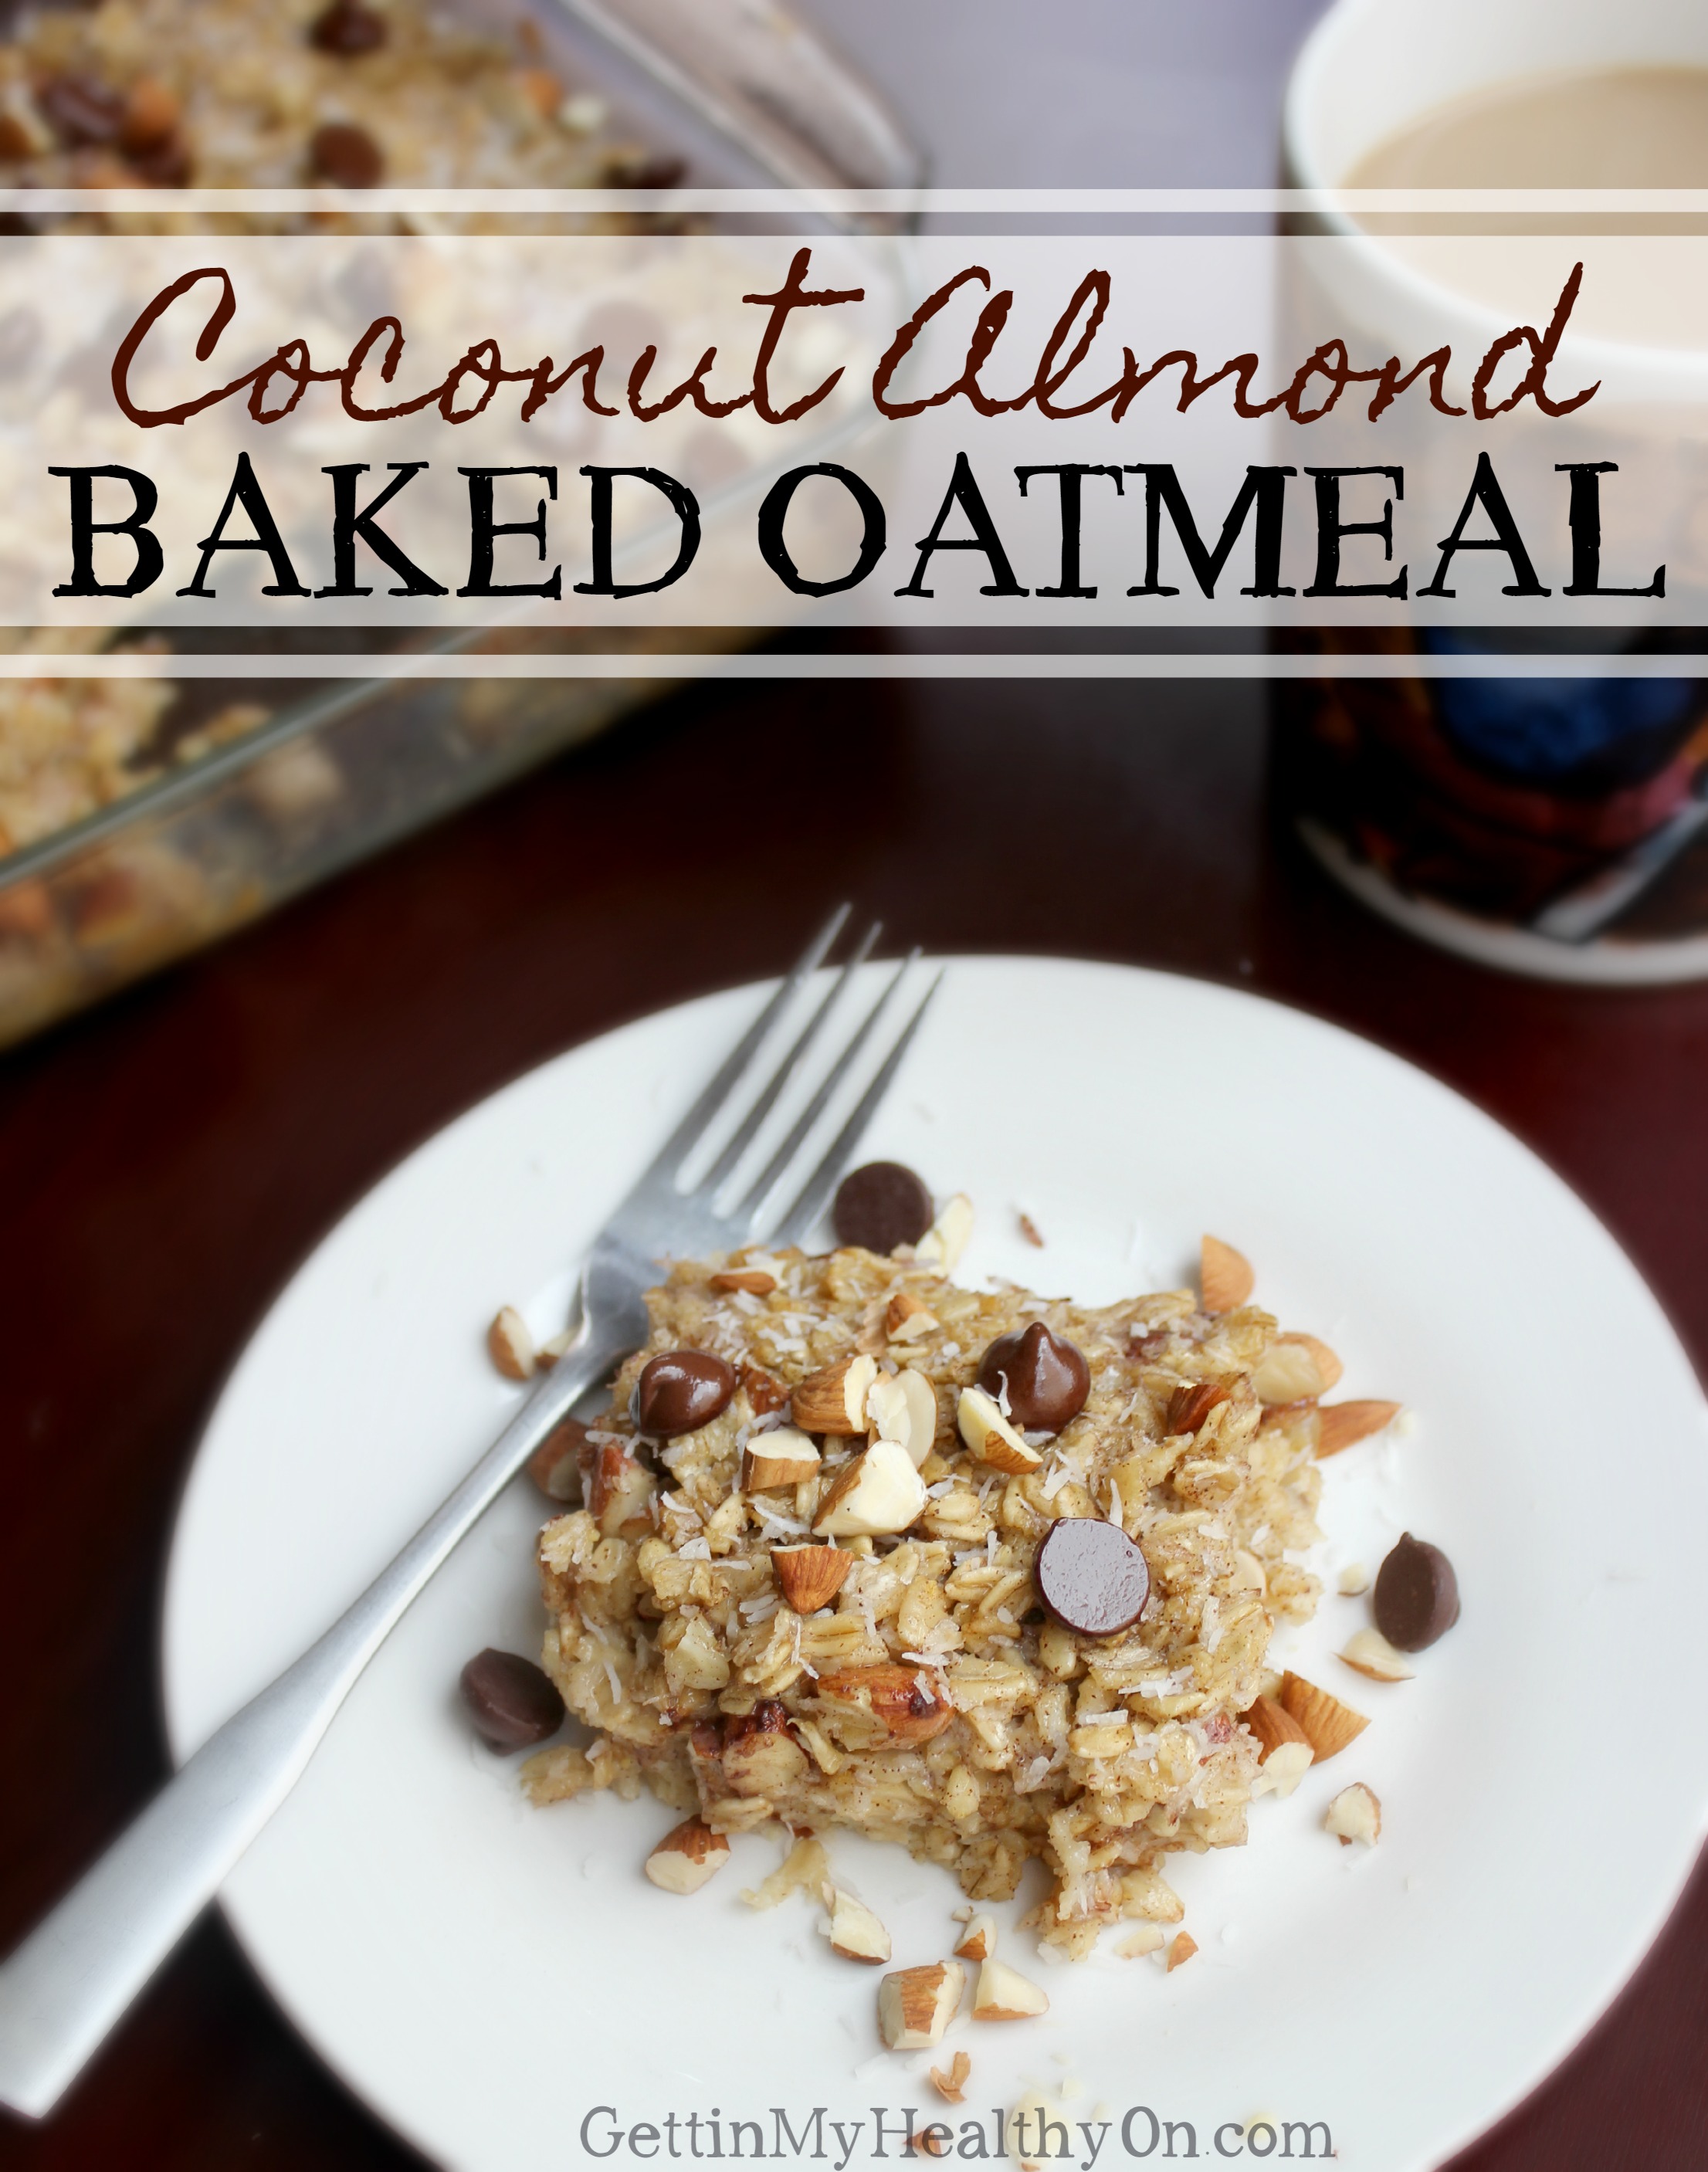 Coconut Almond Baked Oatmeal